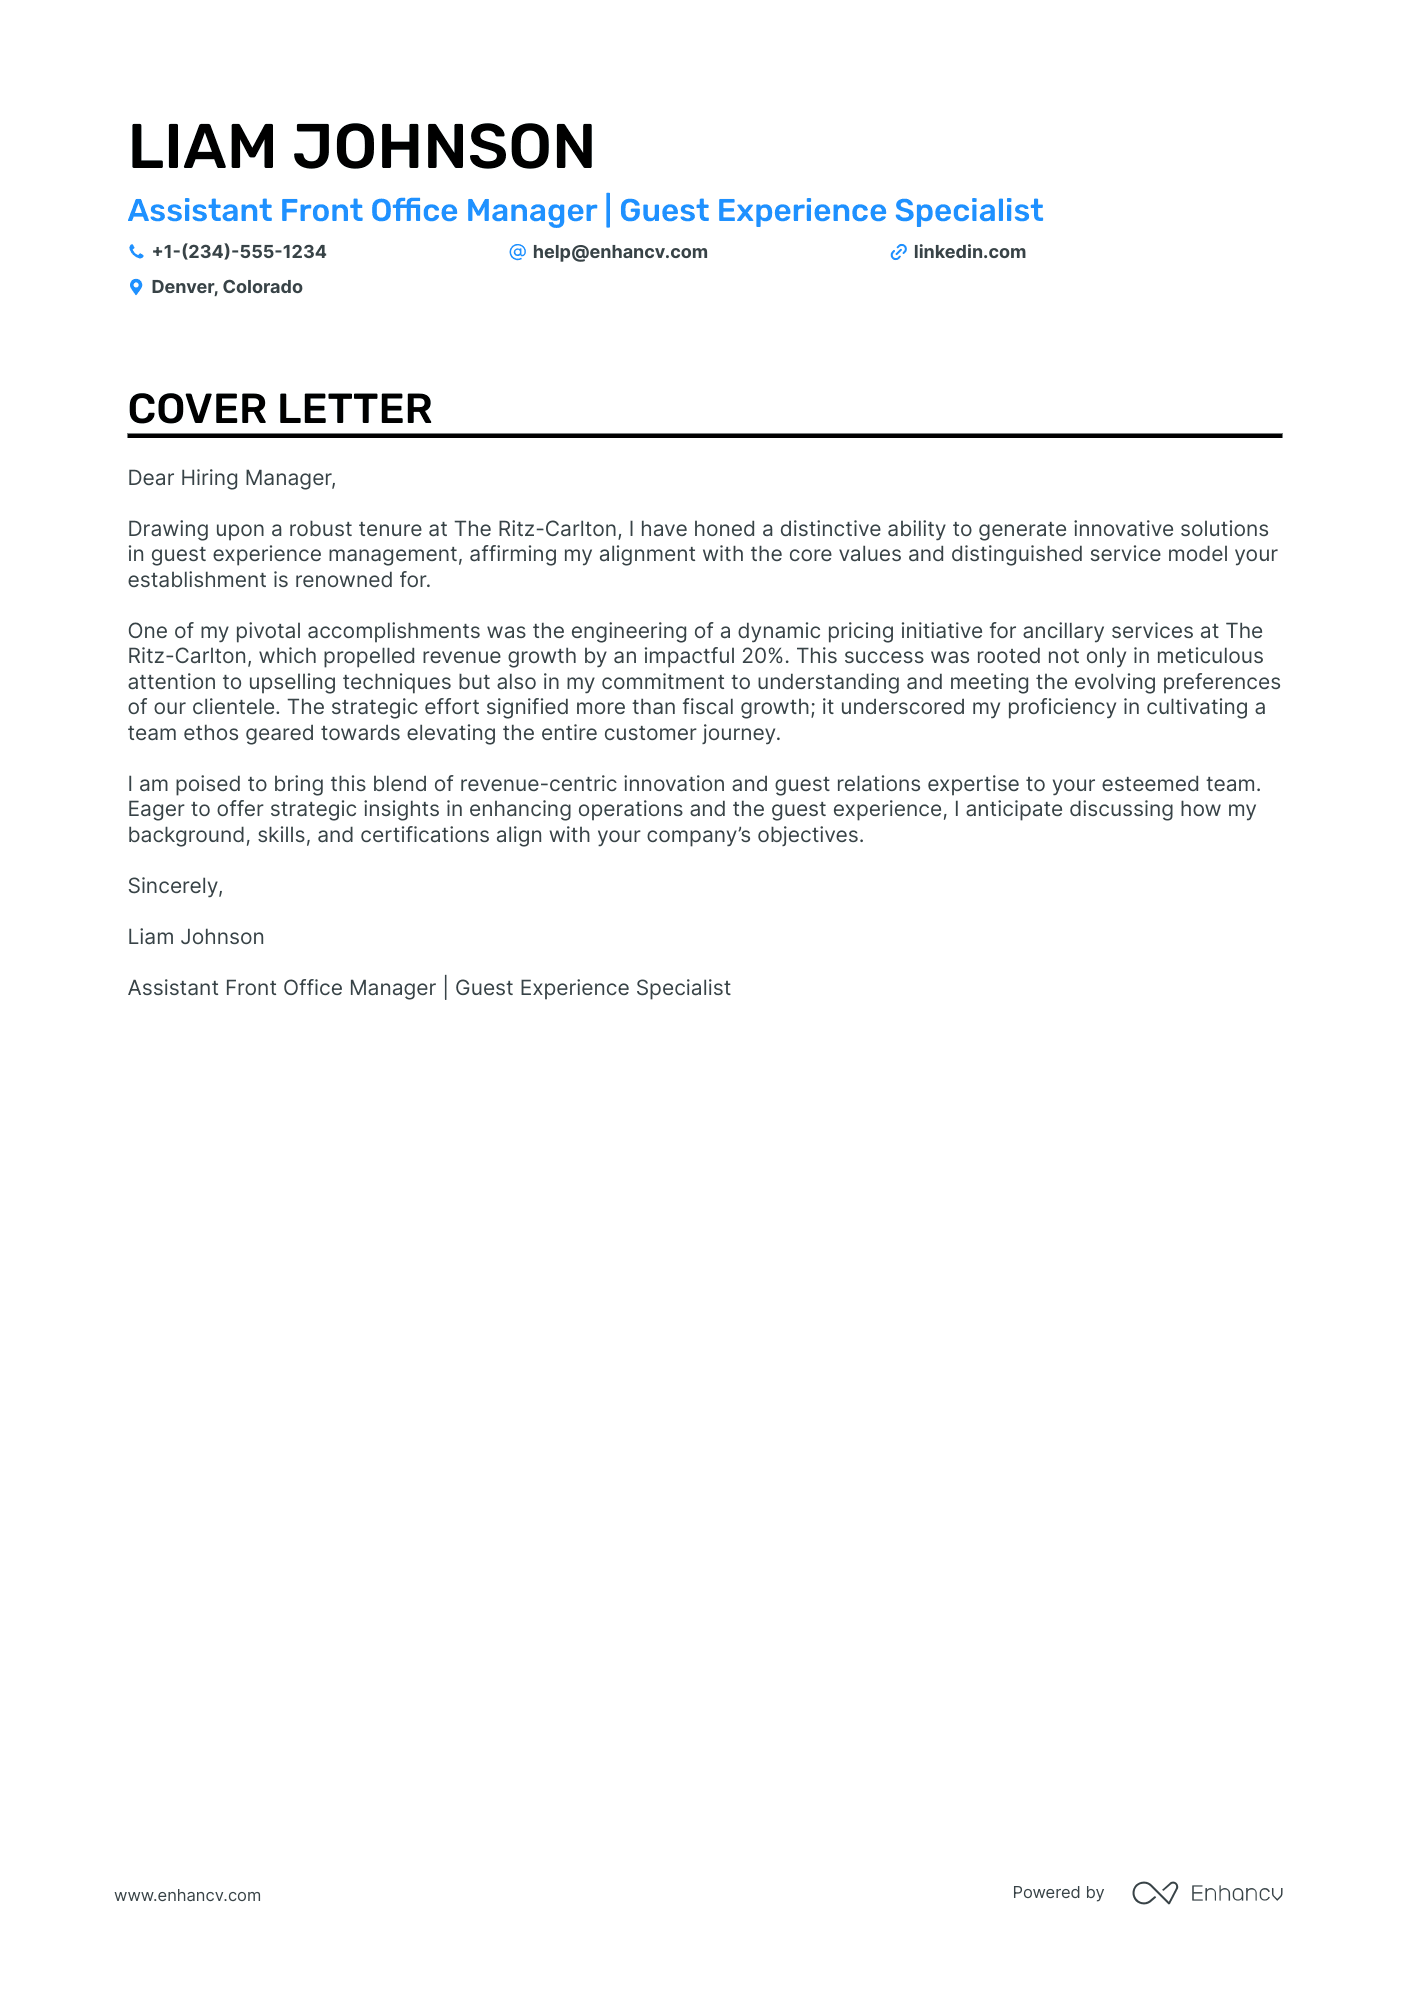 Assistant Front Office Manager cover letter